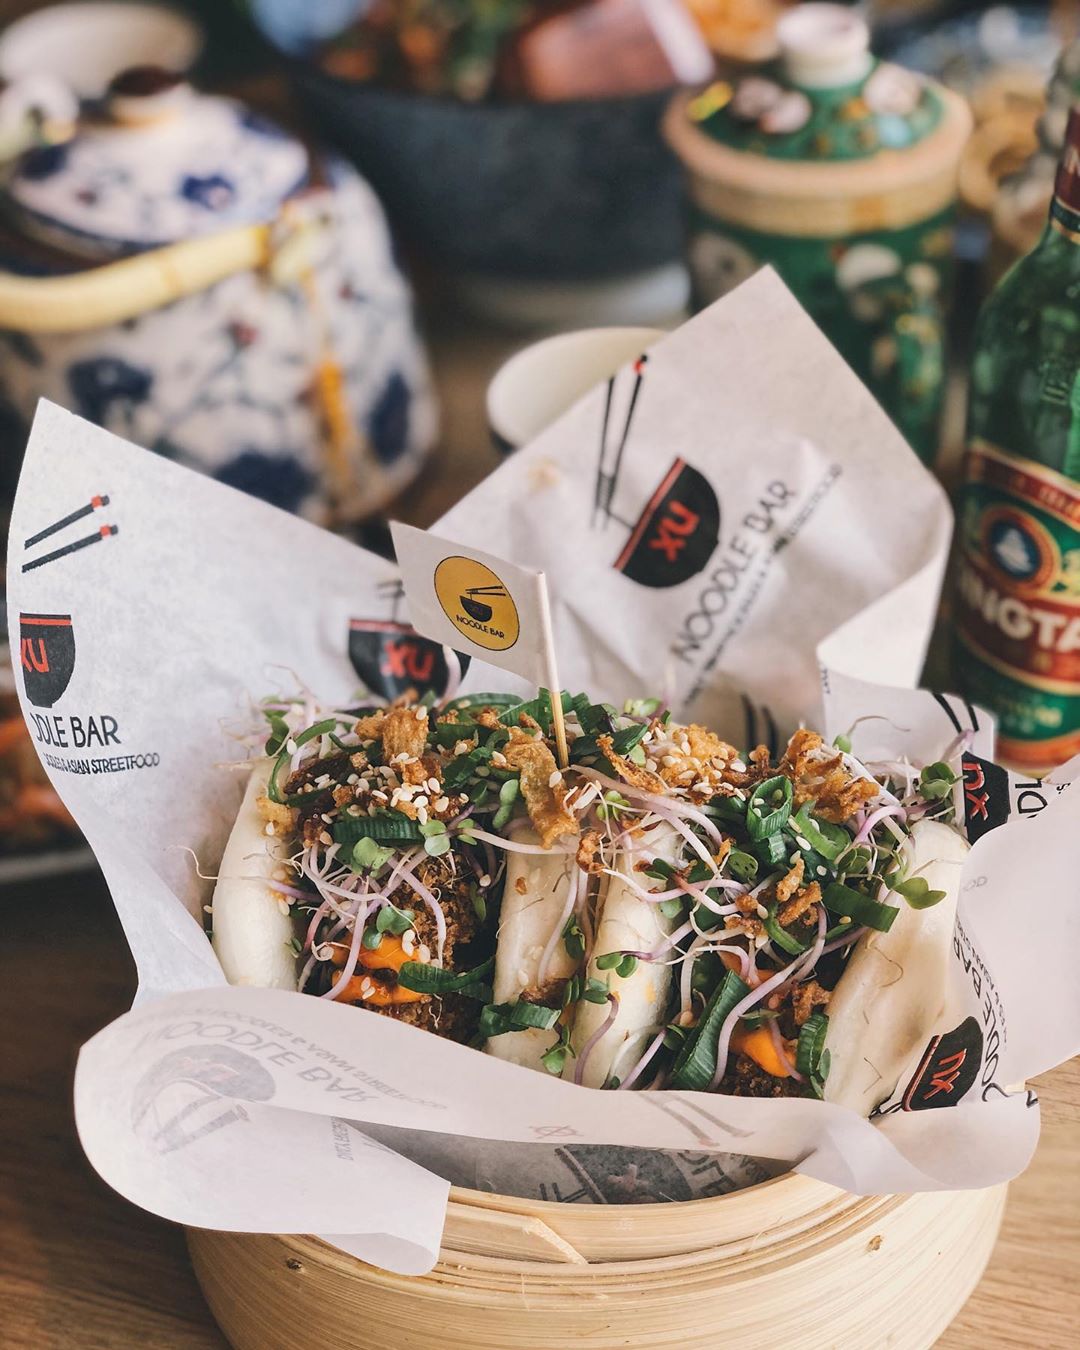 This Bao Bun is called the: Let it Bu(r)n?. Made with crispy chicken and sriracha mayonaise. Do you get the word joke?? .
.
.
.
.
#XuNoodleBar #Tilburg #Tillie #Noodles #Asian #Chinese #Food #Homemade #Hotspot #FollowUs #SendNoods #BaoBun #Streetfood #Spicy